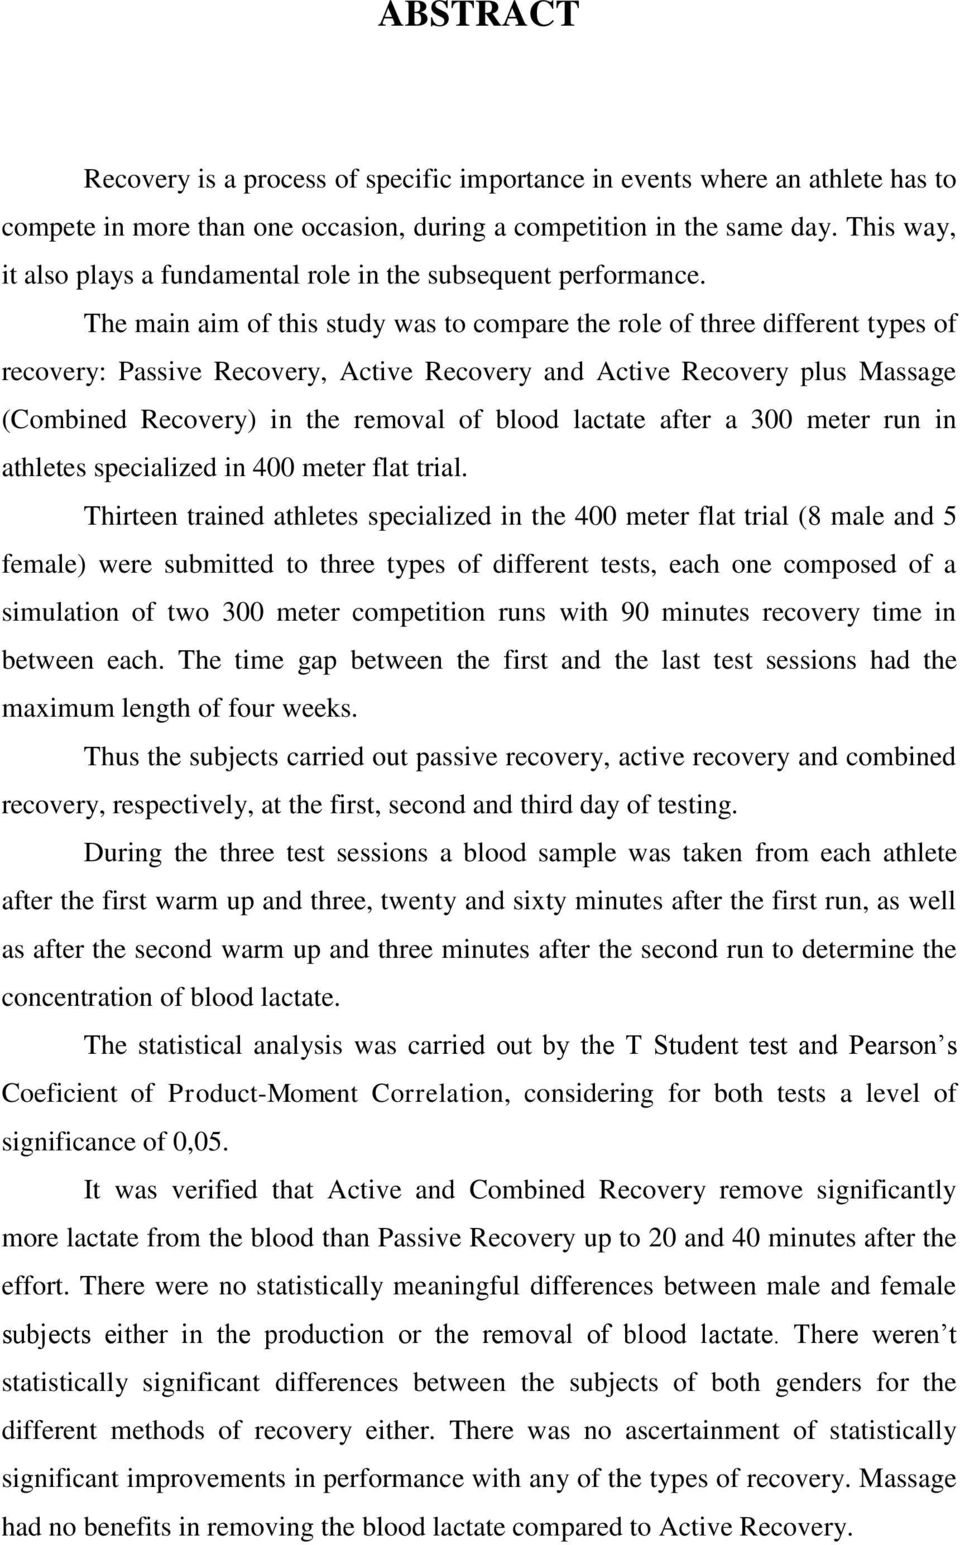 The main aim of this study was to compare the role of three different types of recovery: Passive Recovery, Active Recovery and Active Recovery plus Massage (Combined Recovery) in the removal of blood